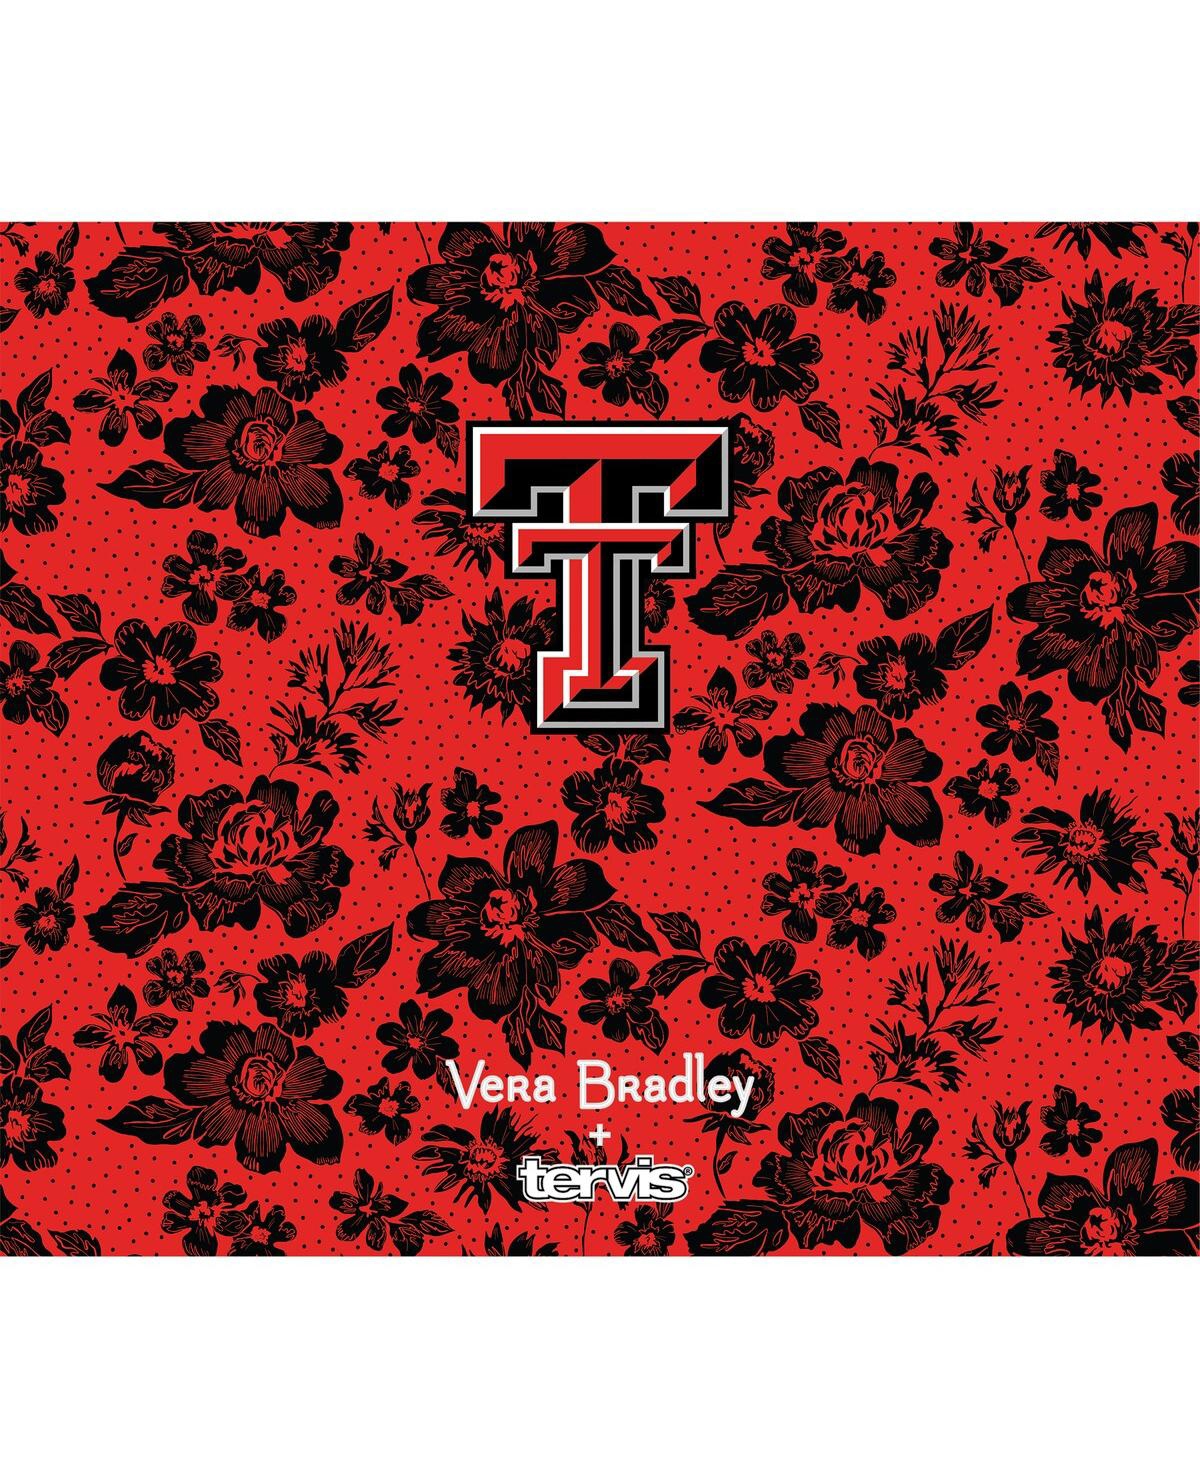 Shop Vera Bradley X Tervis Tumbler Texas Tech Red Raiders 24 oz Wide Mouth Bottle With Deluxe Lid